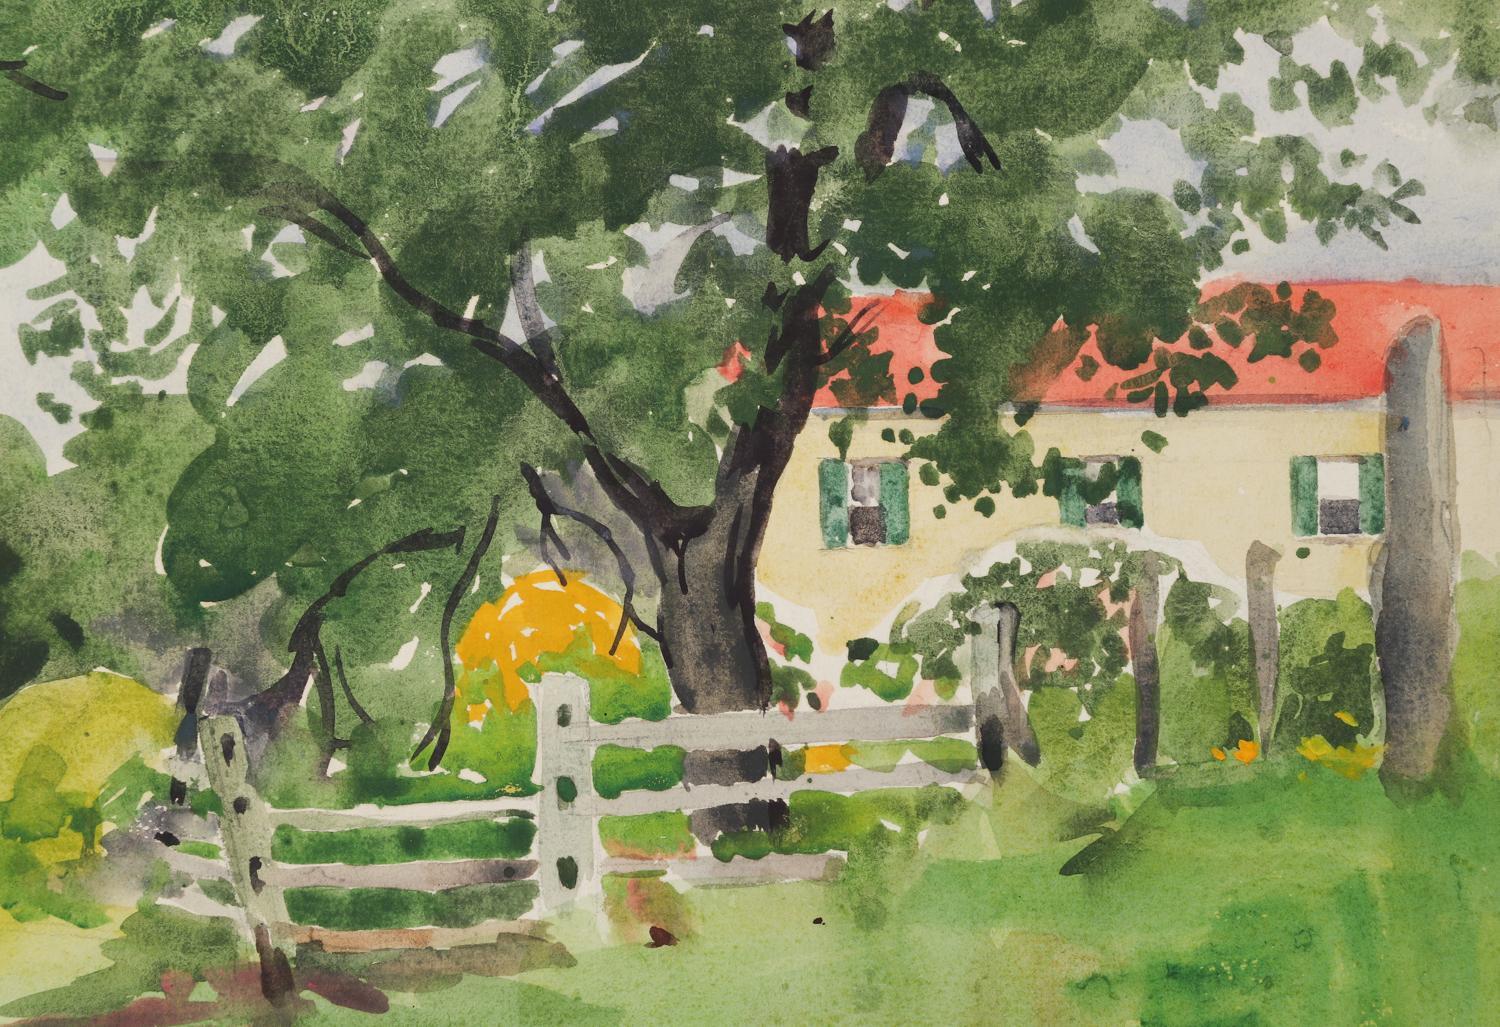 1922 New England Farm Watercolor Painting by Egbert Cadmus In Good Condition For Sale In Seguin, TX